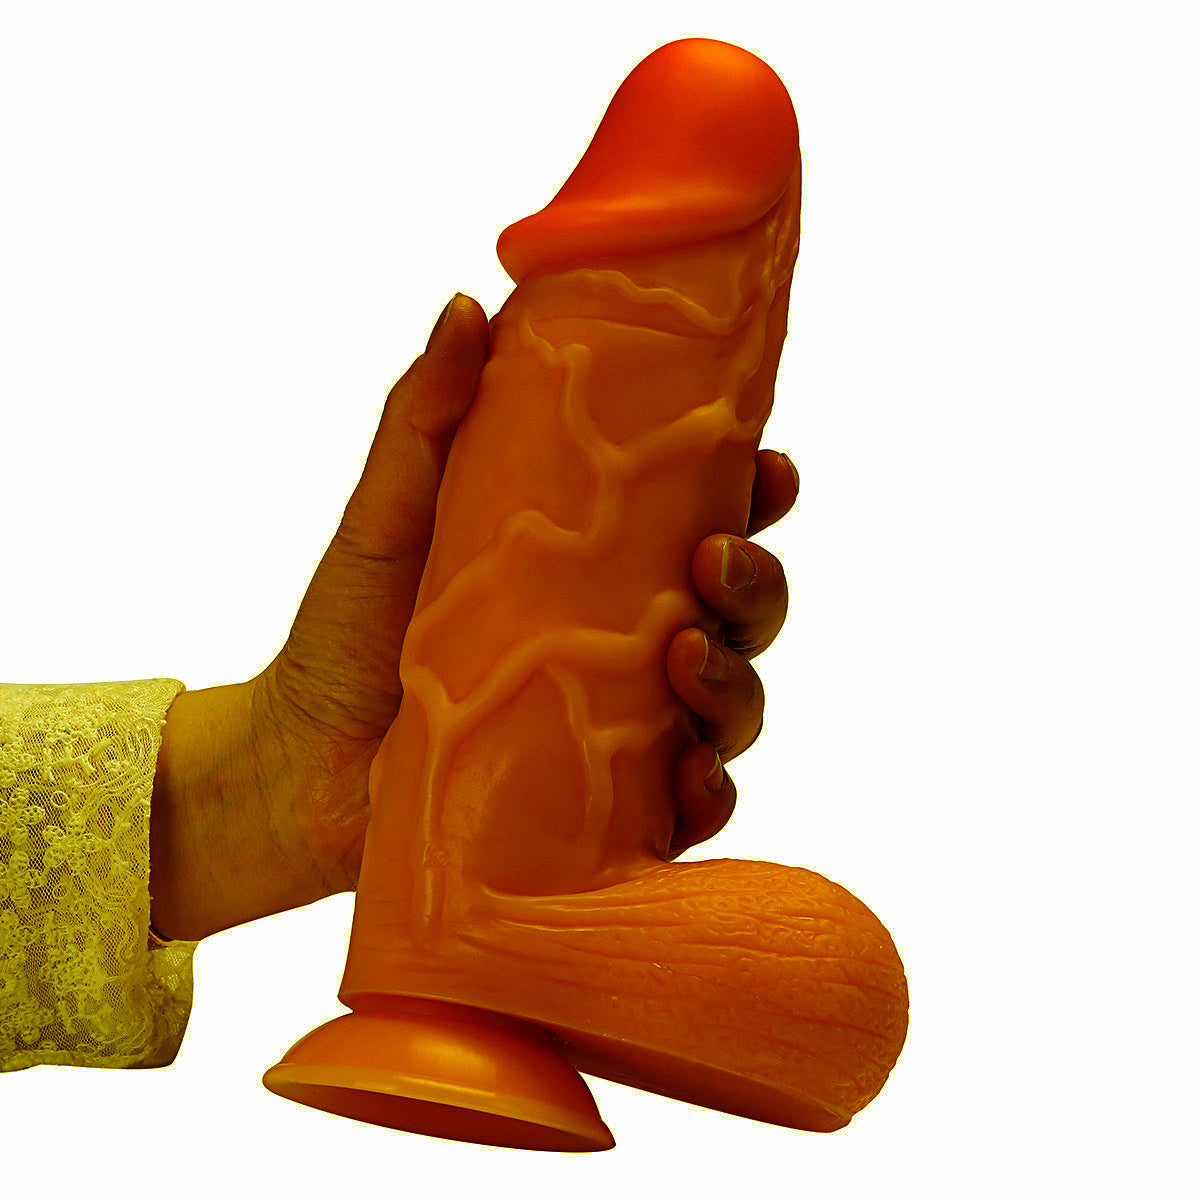 SUPER Huge Realistic Brown Dildos 5inch Width & 11inch Length Thick Dildo Sex Toys